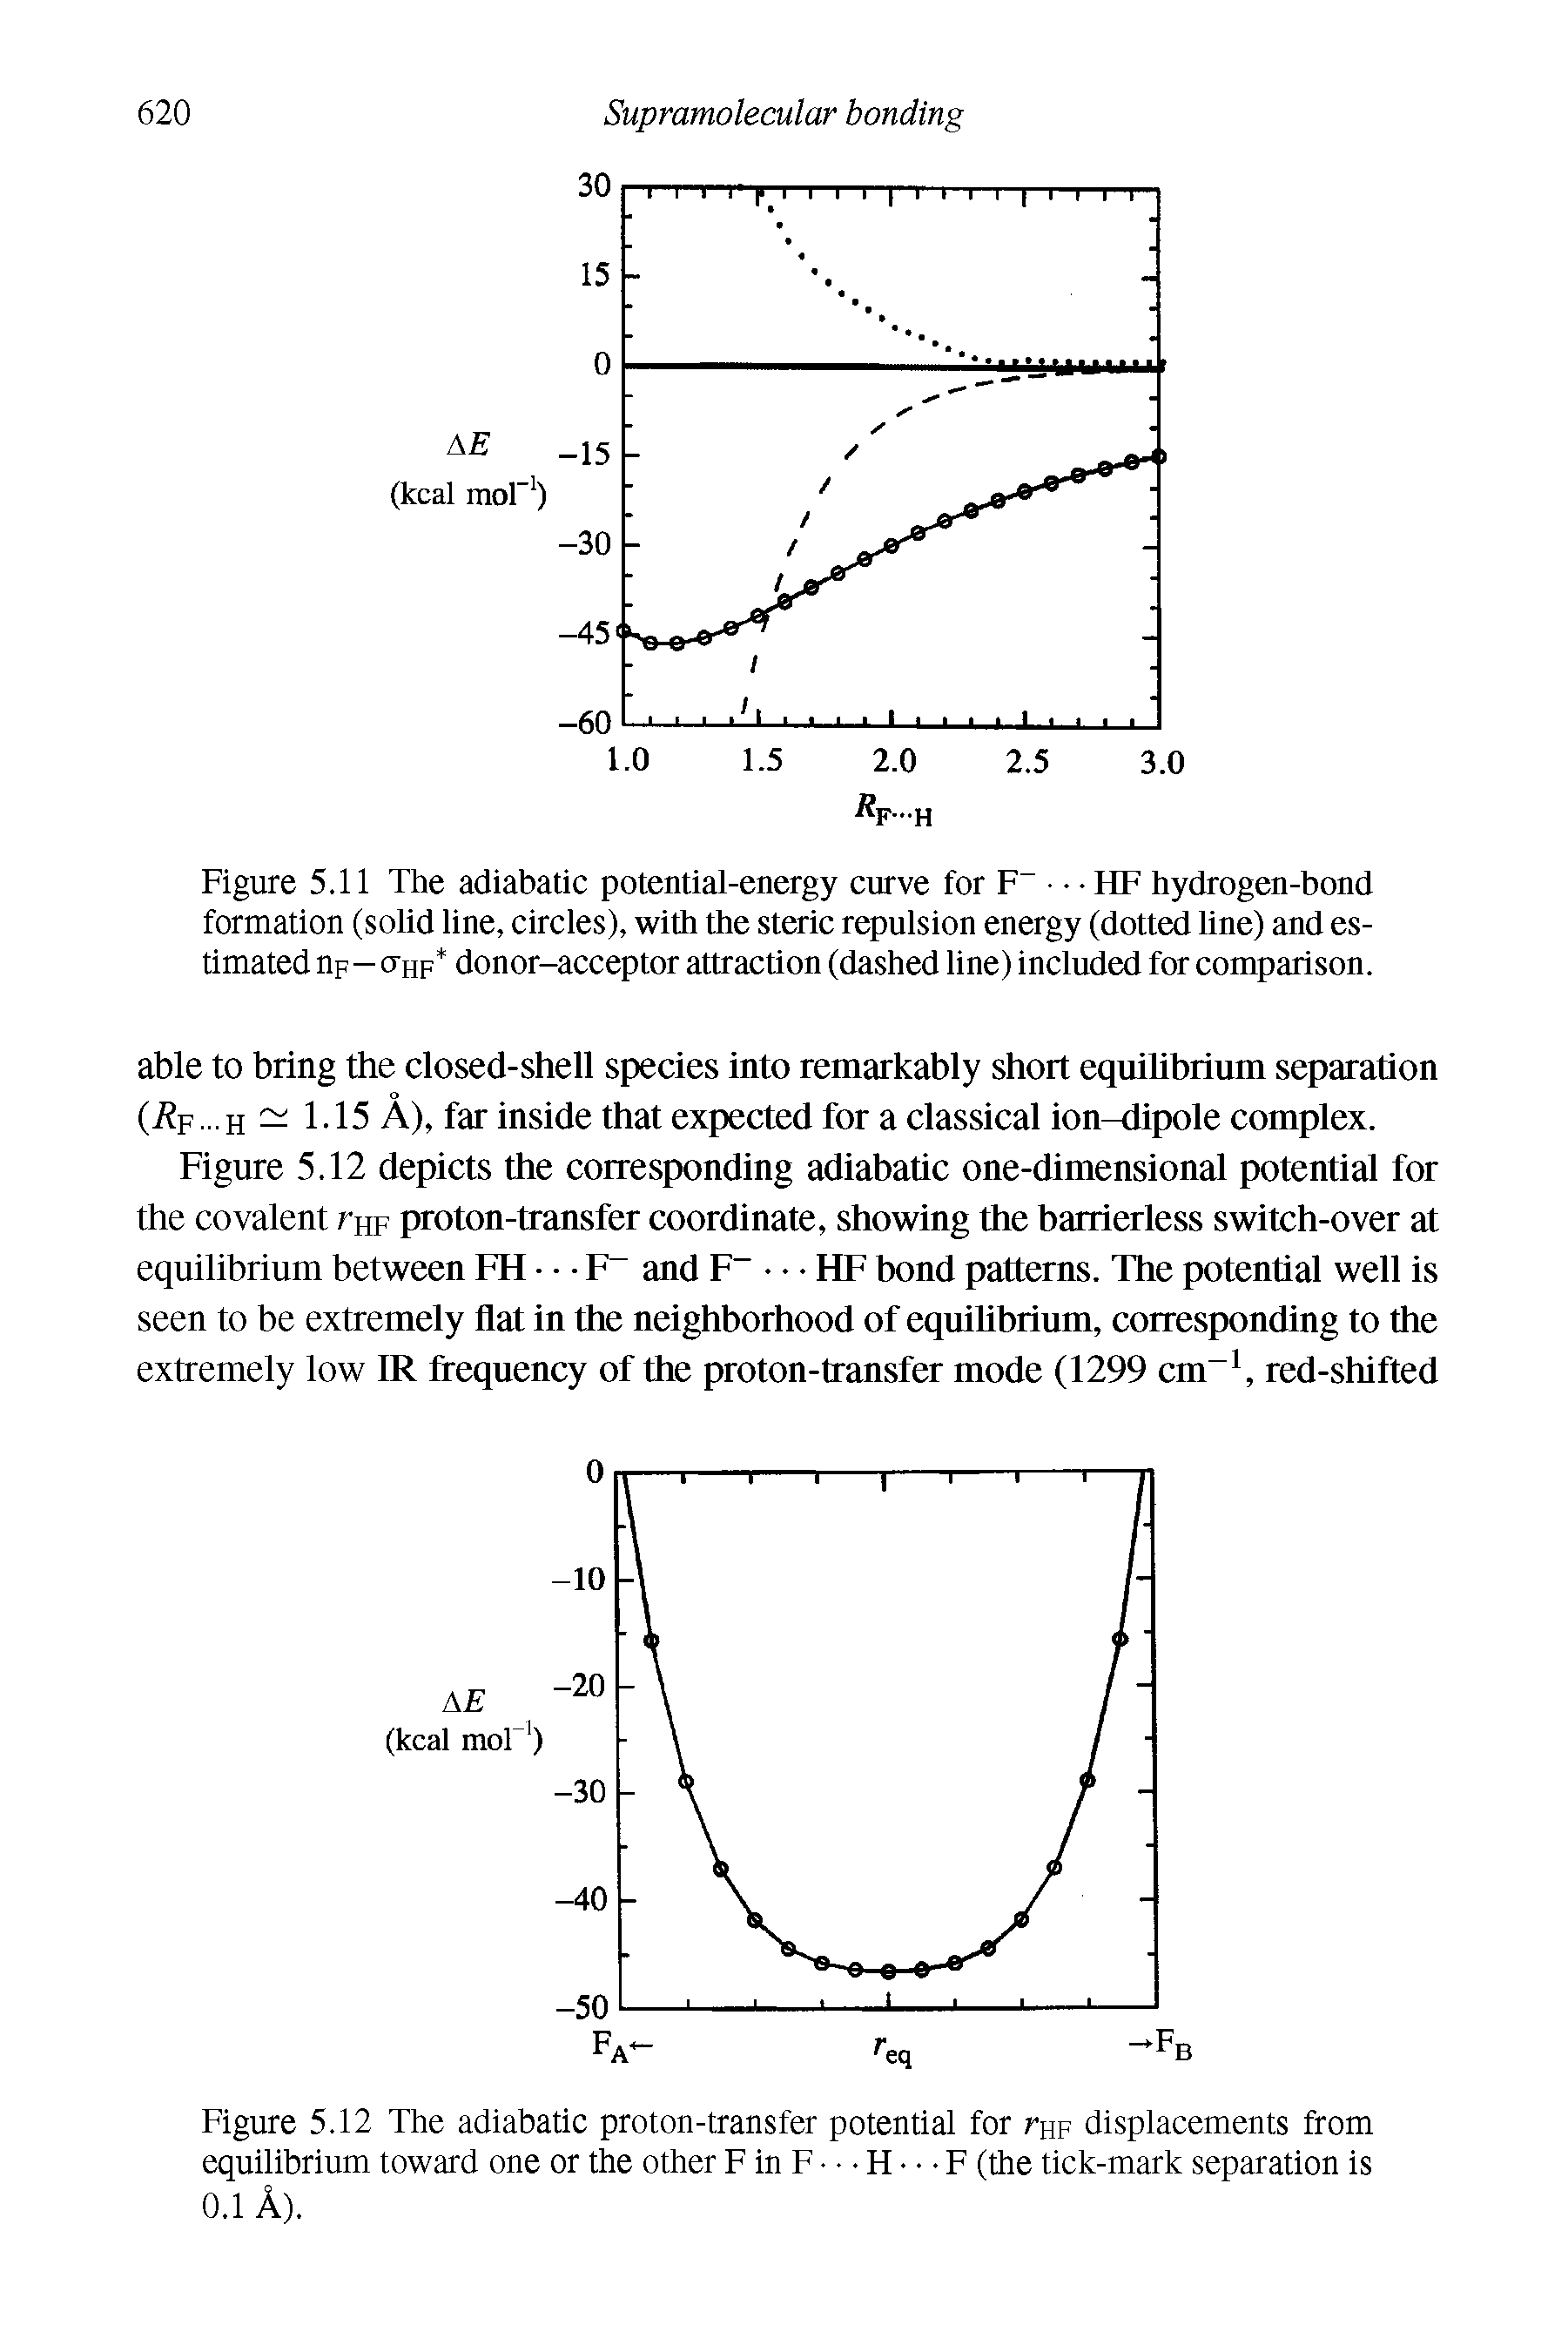 Figure 5.12 The adiabatic proton-transfer potential for thf displacements from equilibrium toward one or the other F in F H F (the tick-mark separation is...